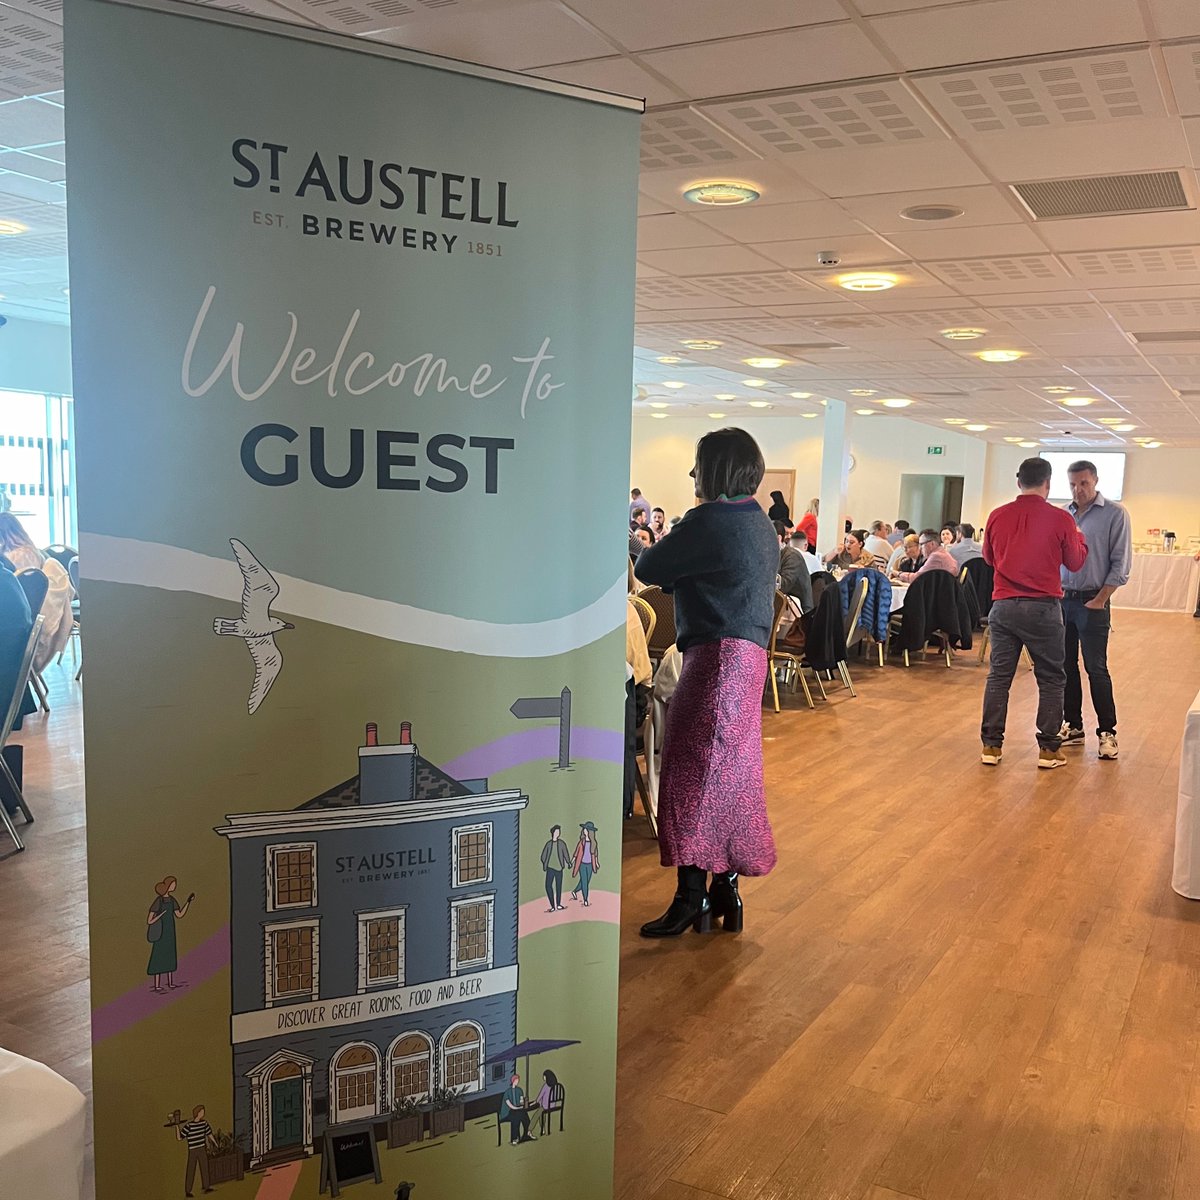 We have St Austell Brewery here today at Sandy Park in our Estuary Suite! 🙌 It's been a great opportunity for all suppliers from across the South West to meet 👊 #SandyPark #Events